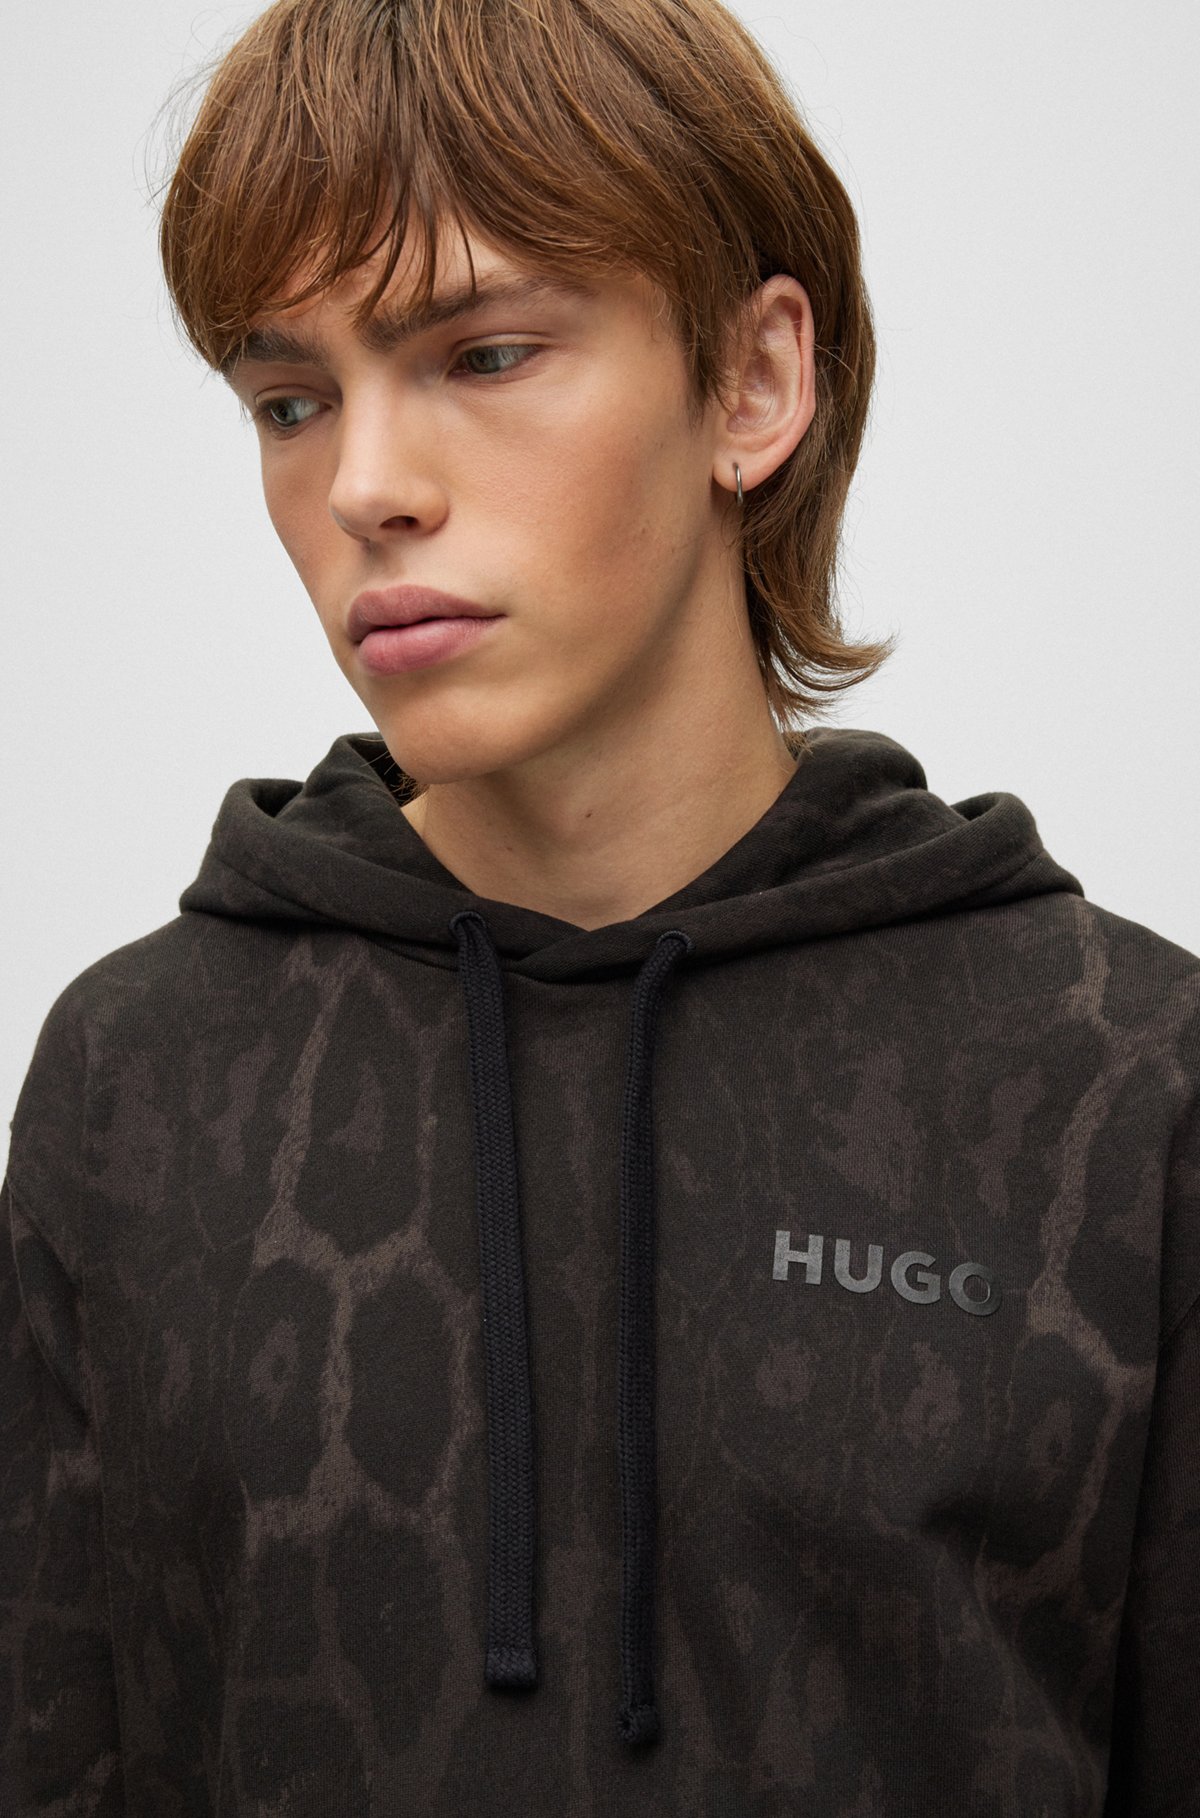 HUGO - Jaglion-pattern hoodie in French-terry cotton